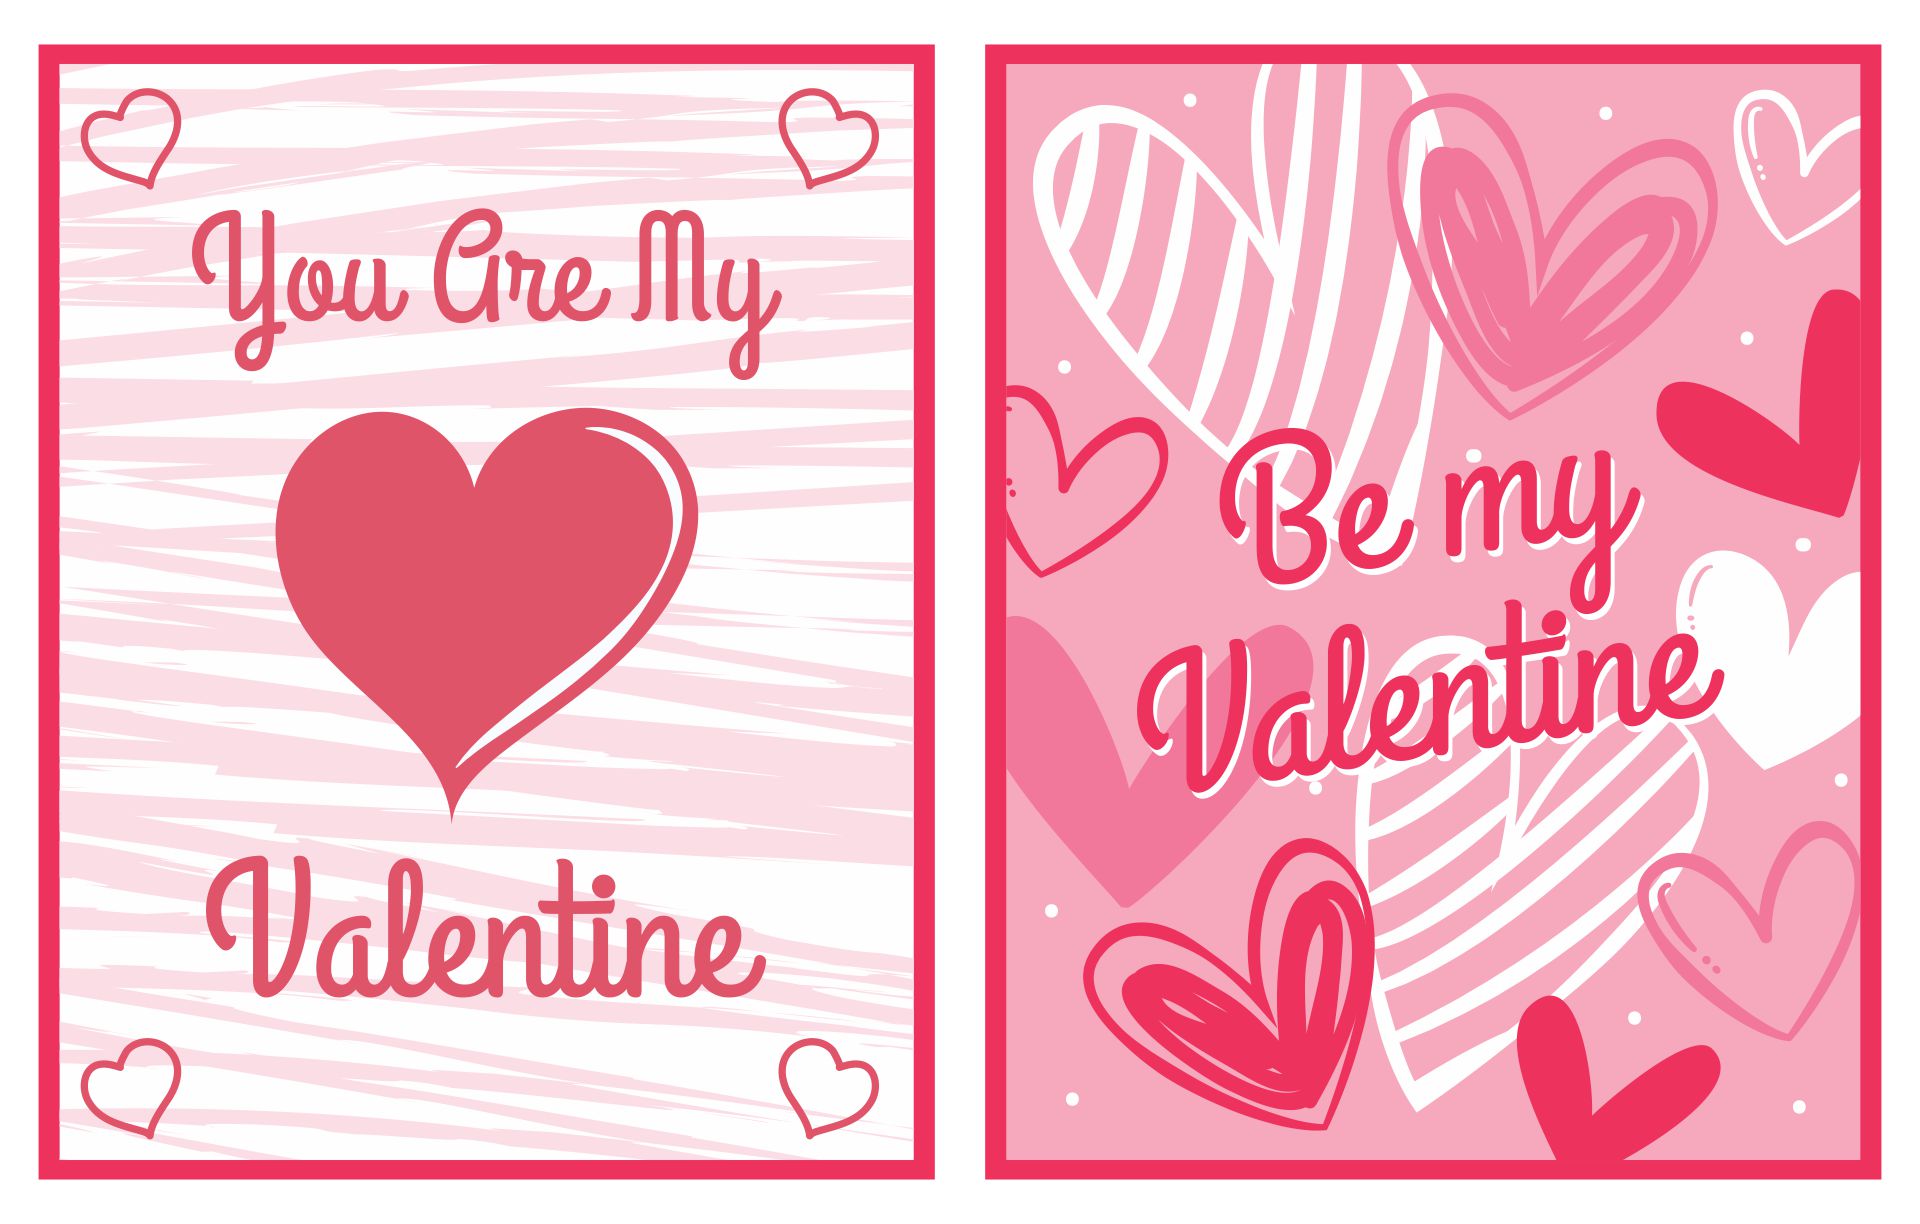 11 Best Printable Valentine's Cards For Friends